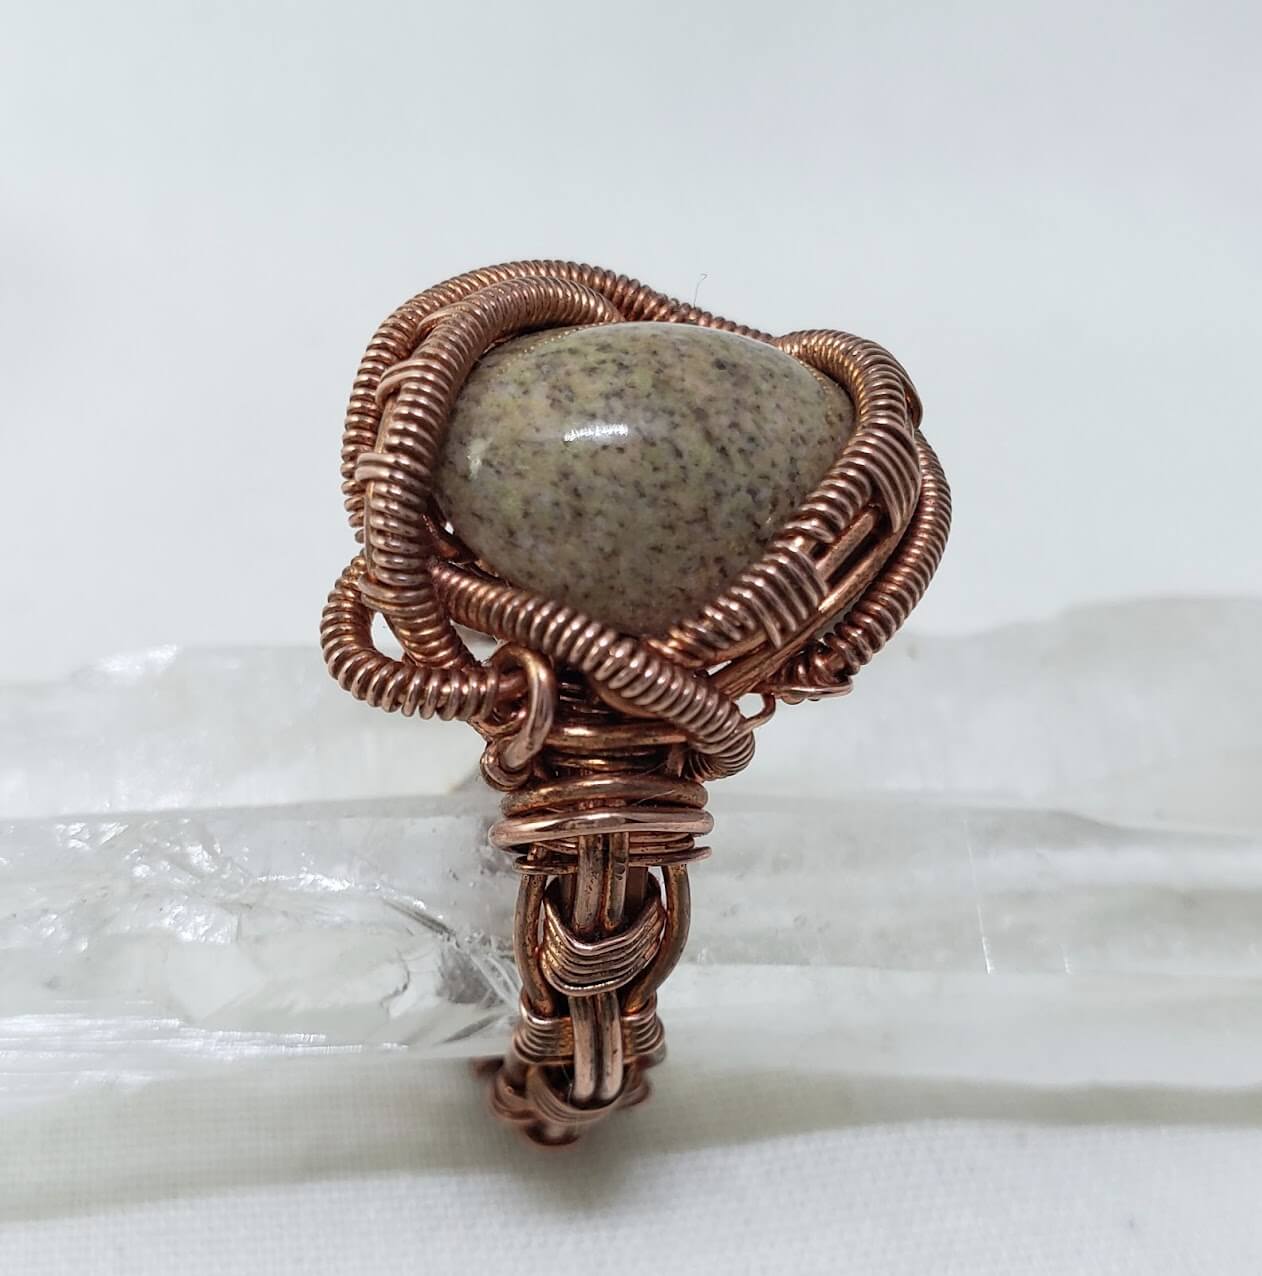 Granite Cabochon in Copper Ring Size 13 - Mother Of Metal - For Fingers - For Her - For Him